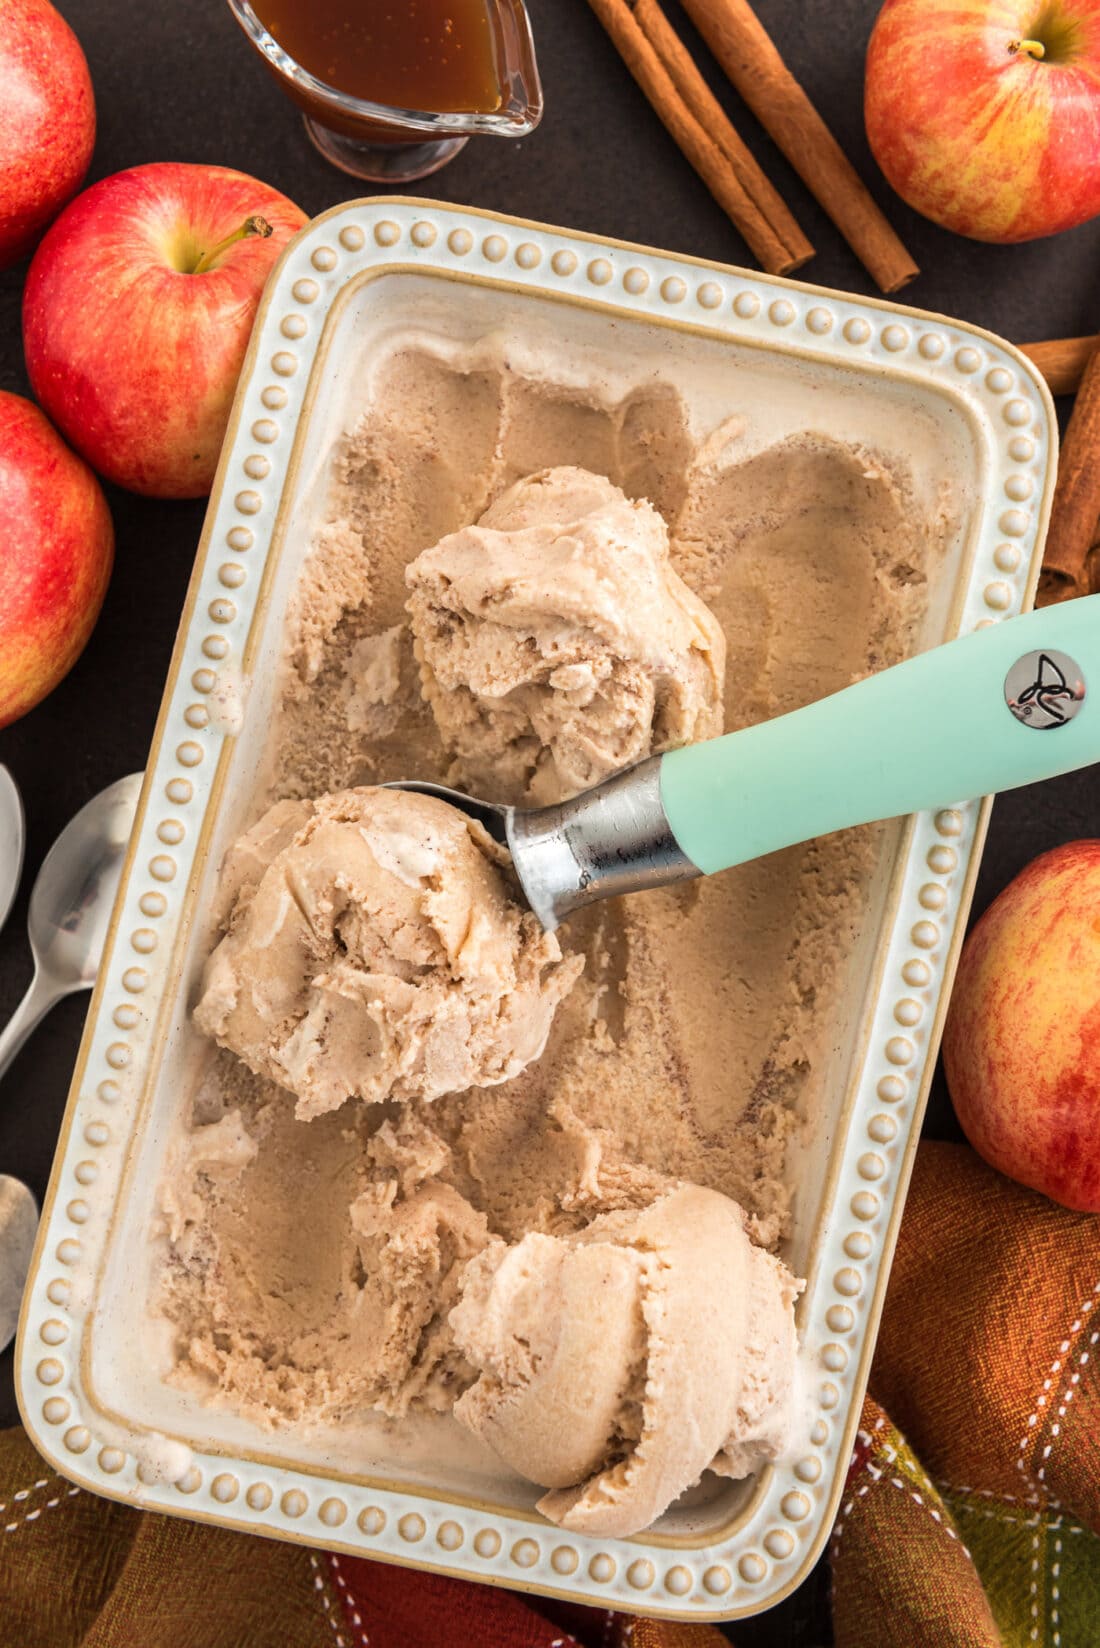 Pan of Apple Cider Ice Cream with an ice cream scoop